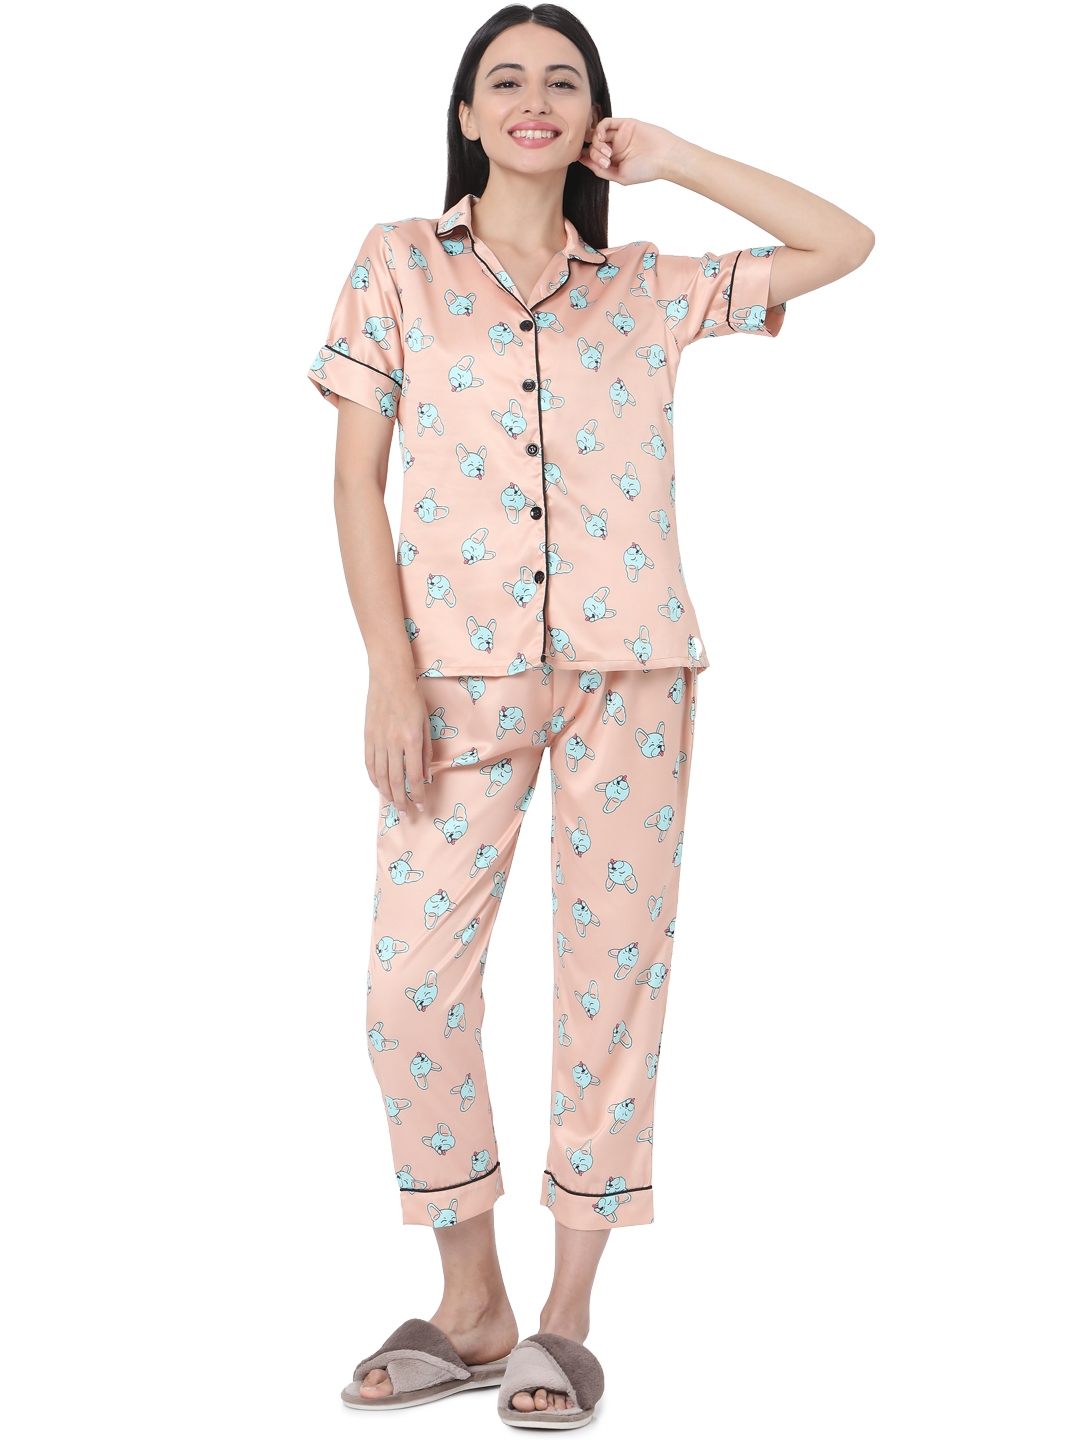 Smarty Pants | Smarty Pants Women's Silk Satin Peach Color & Turquoise Blue Dog Print Night Suit